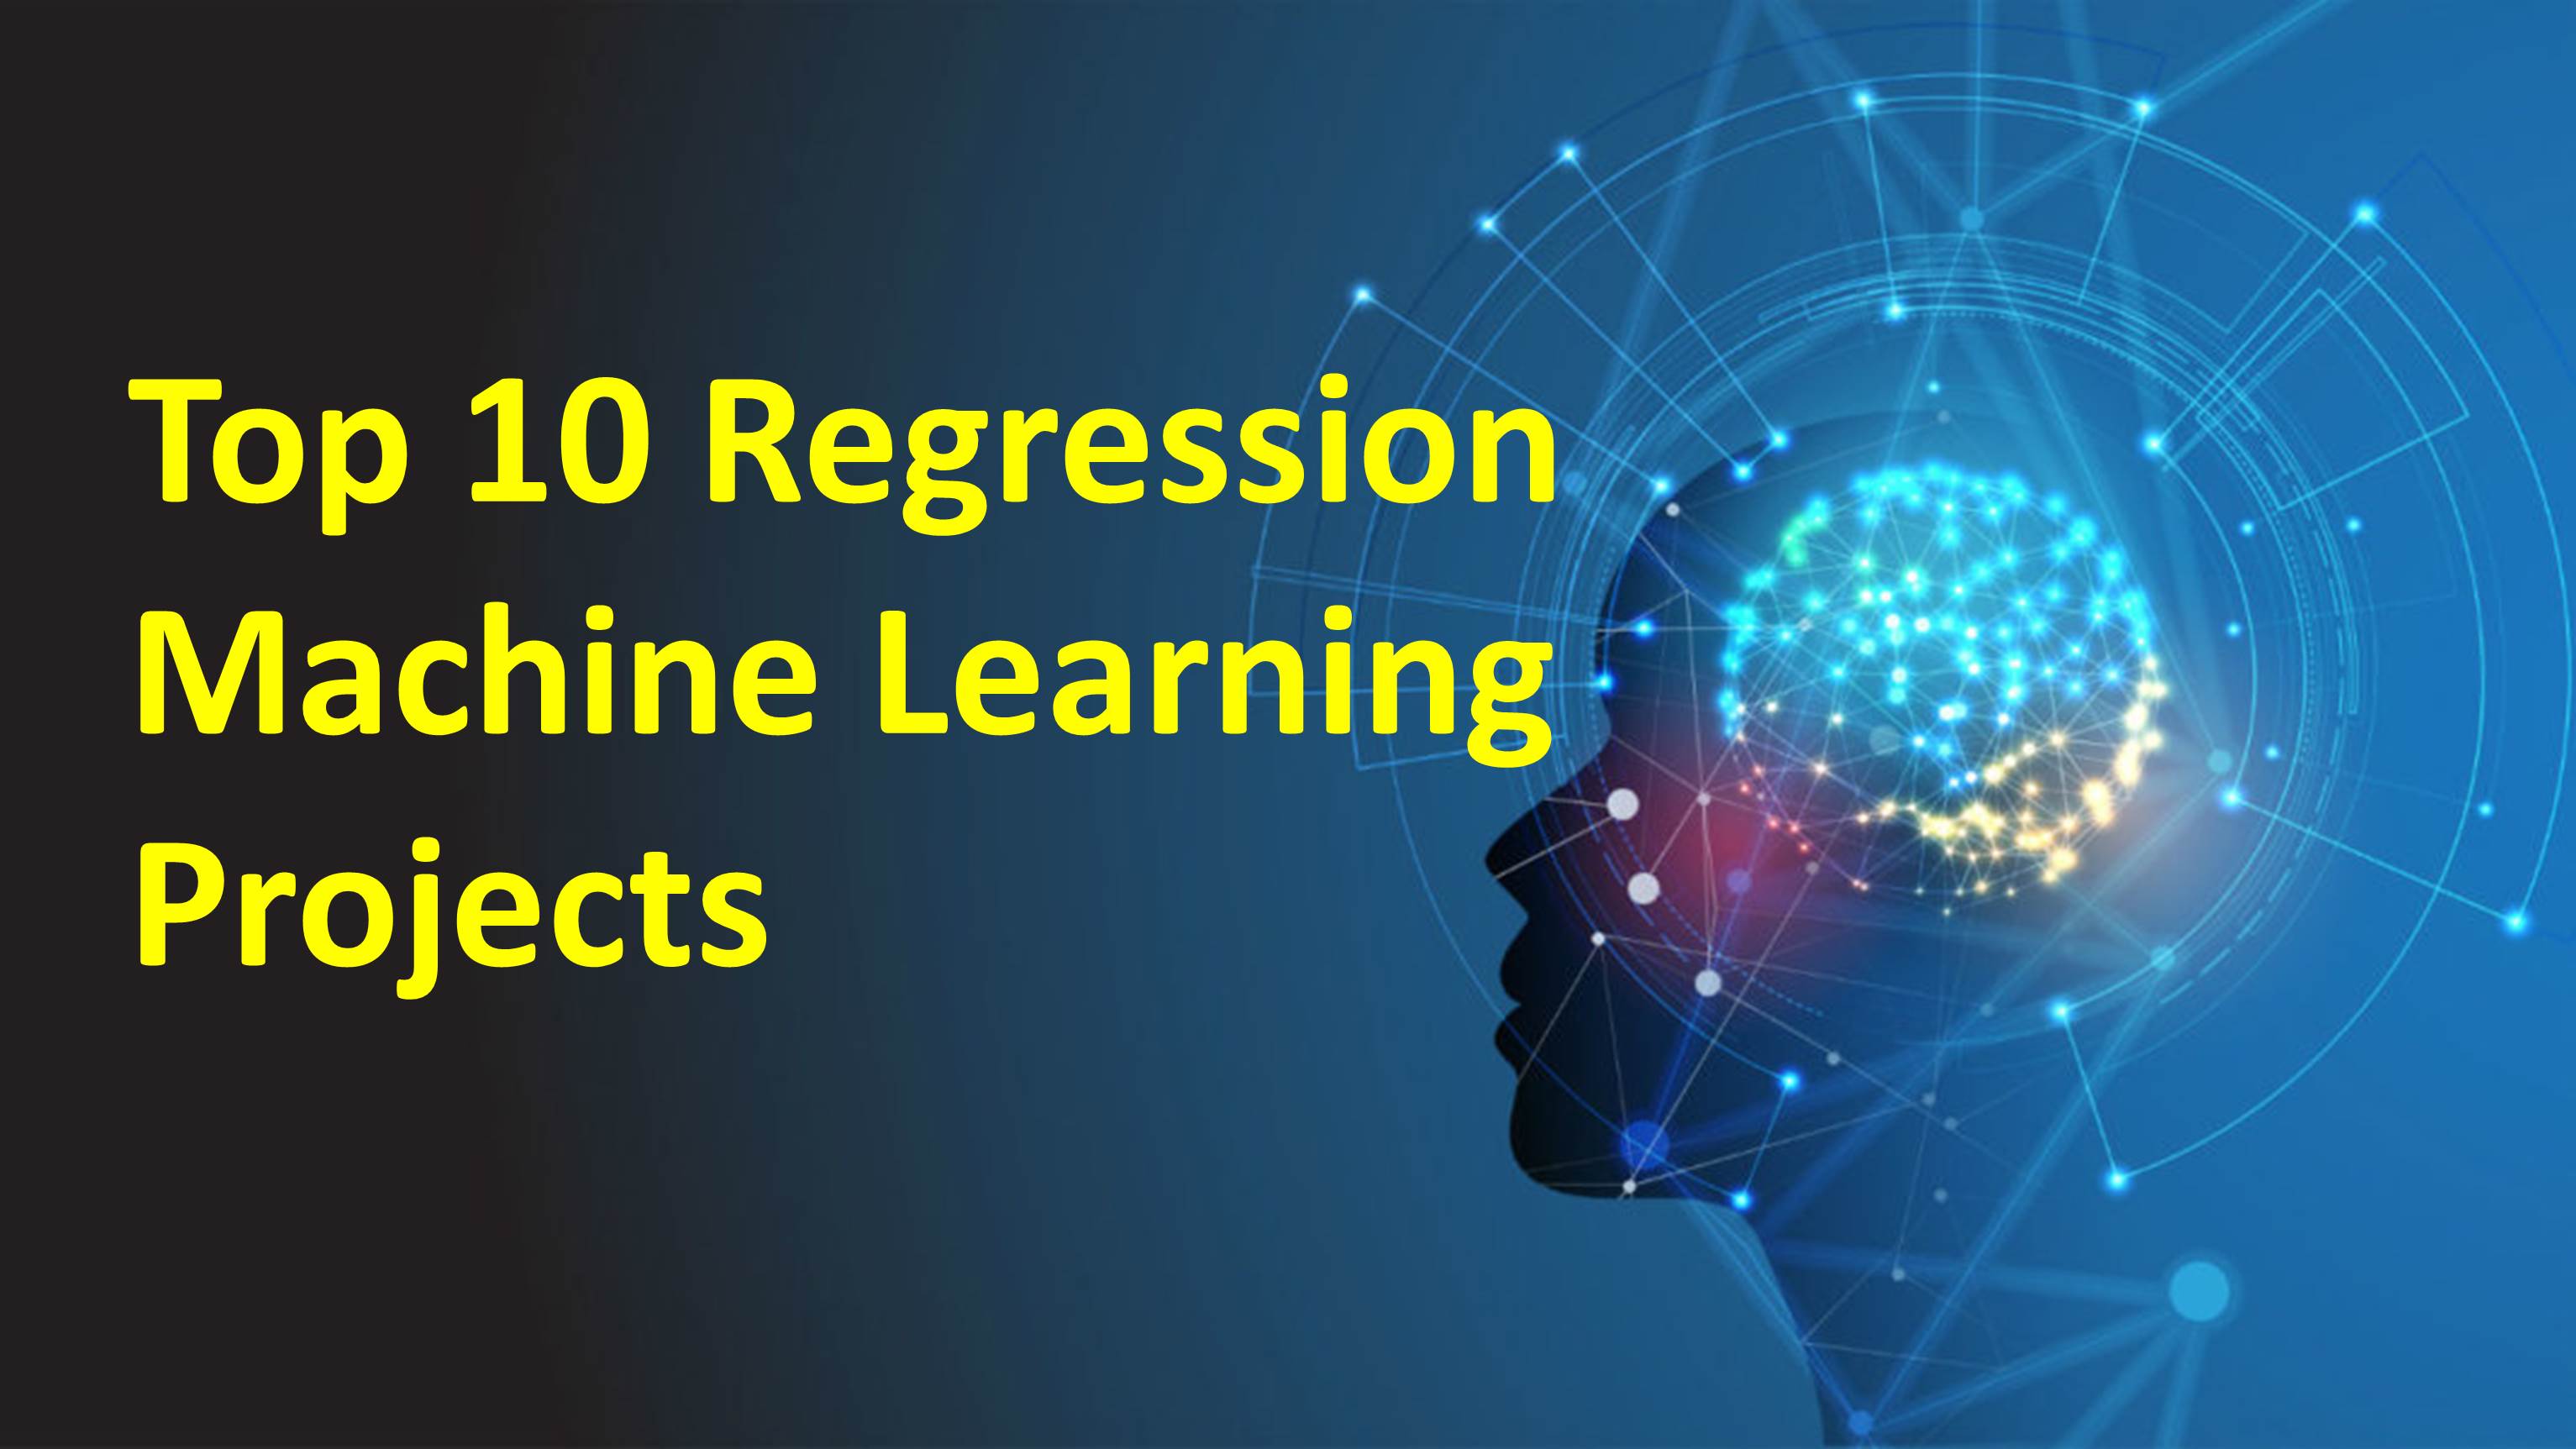 Top 10 Regression Machine Learning Projects